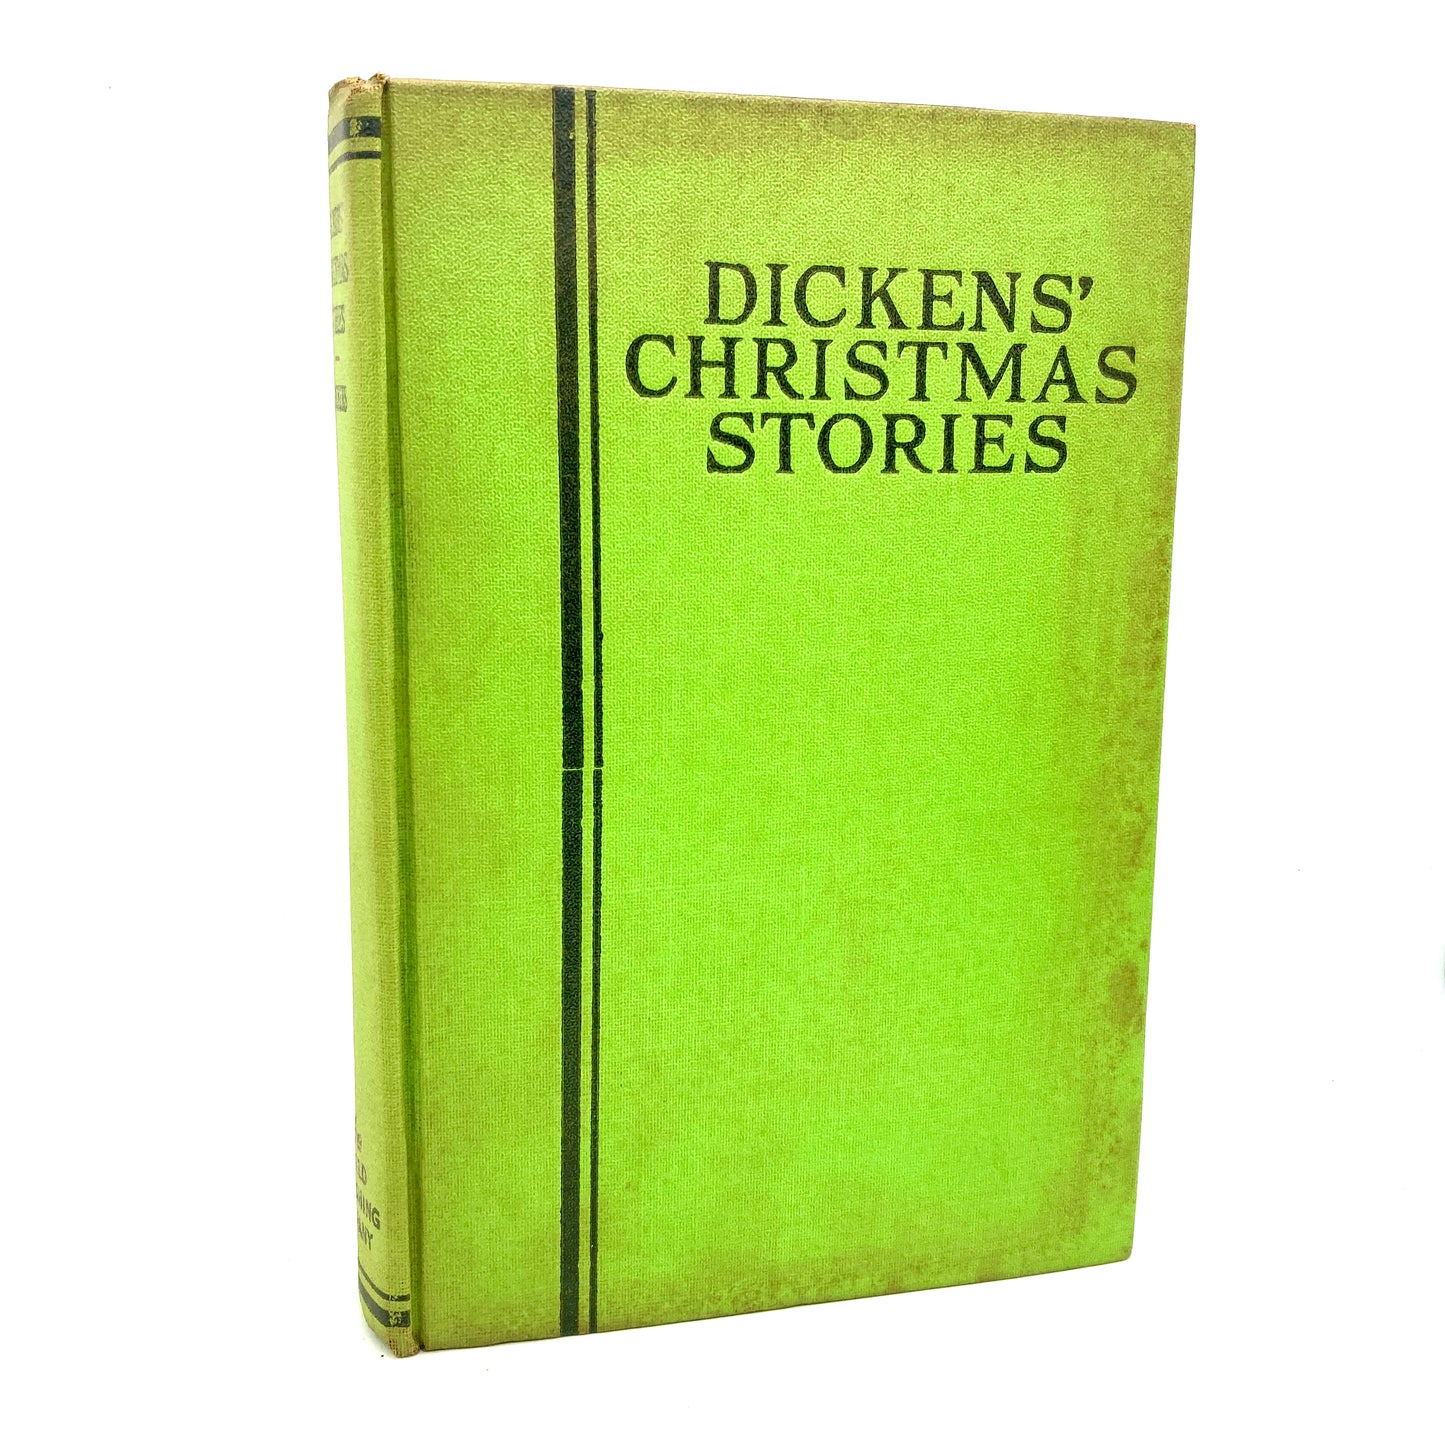 DICKENS, Charles "Christmas Stories" [World Publishing Company, 1946]